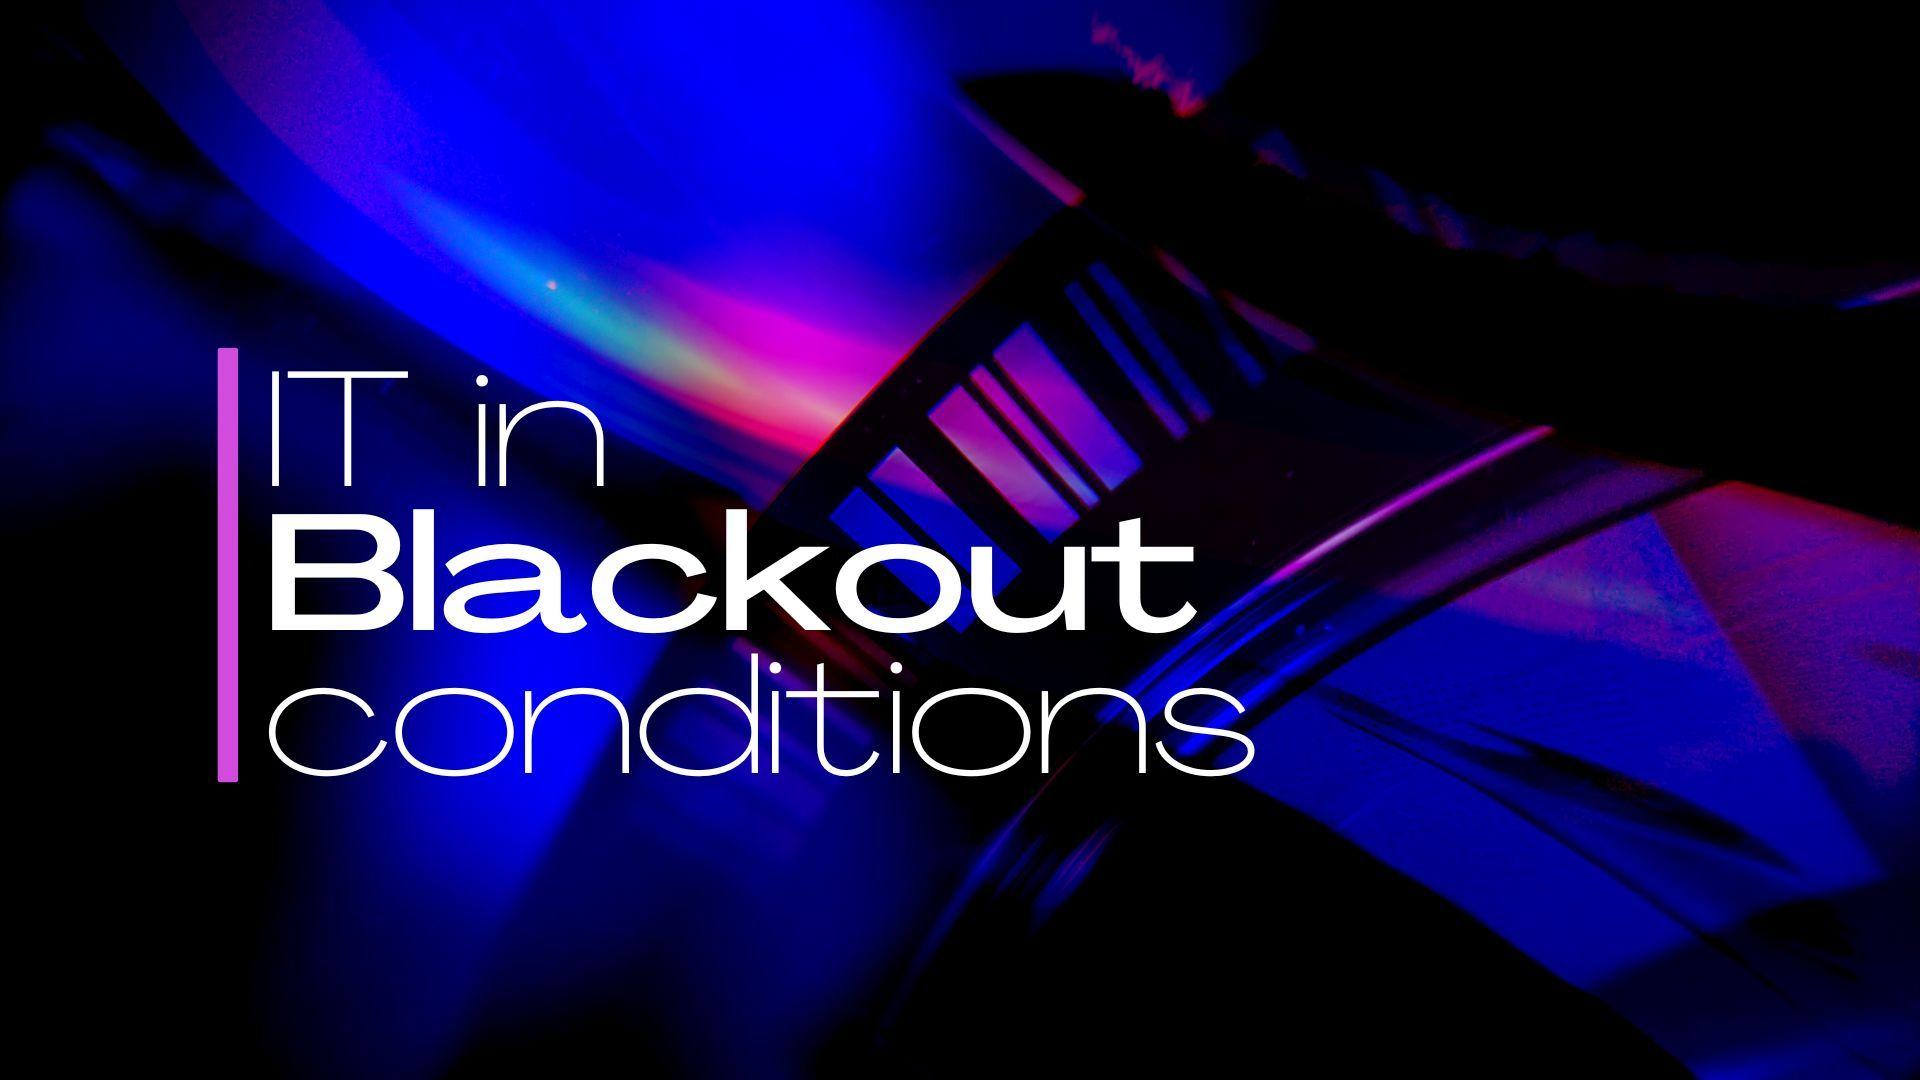 IT-in-blackout-conditions